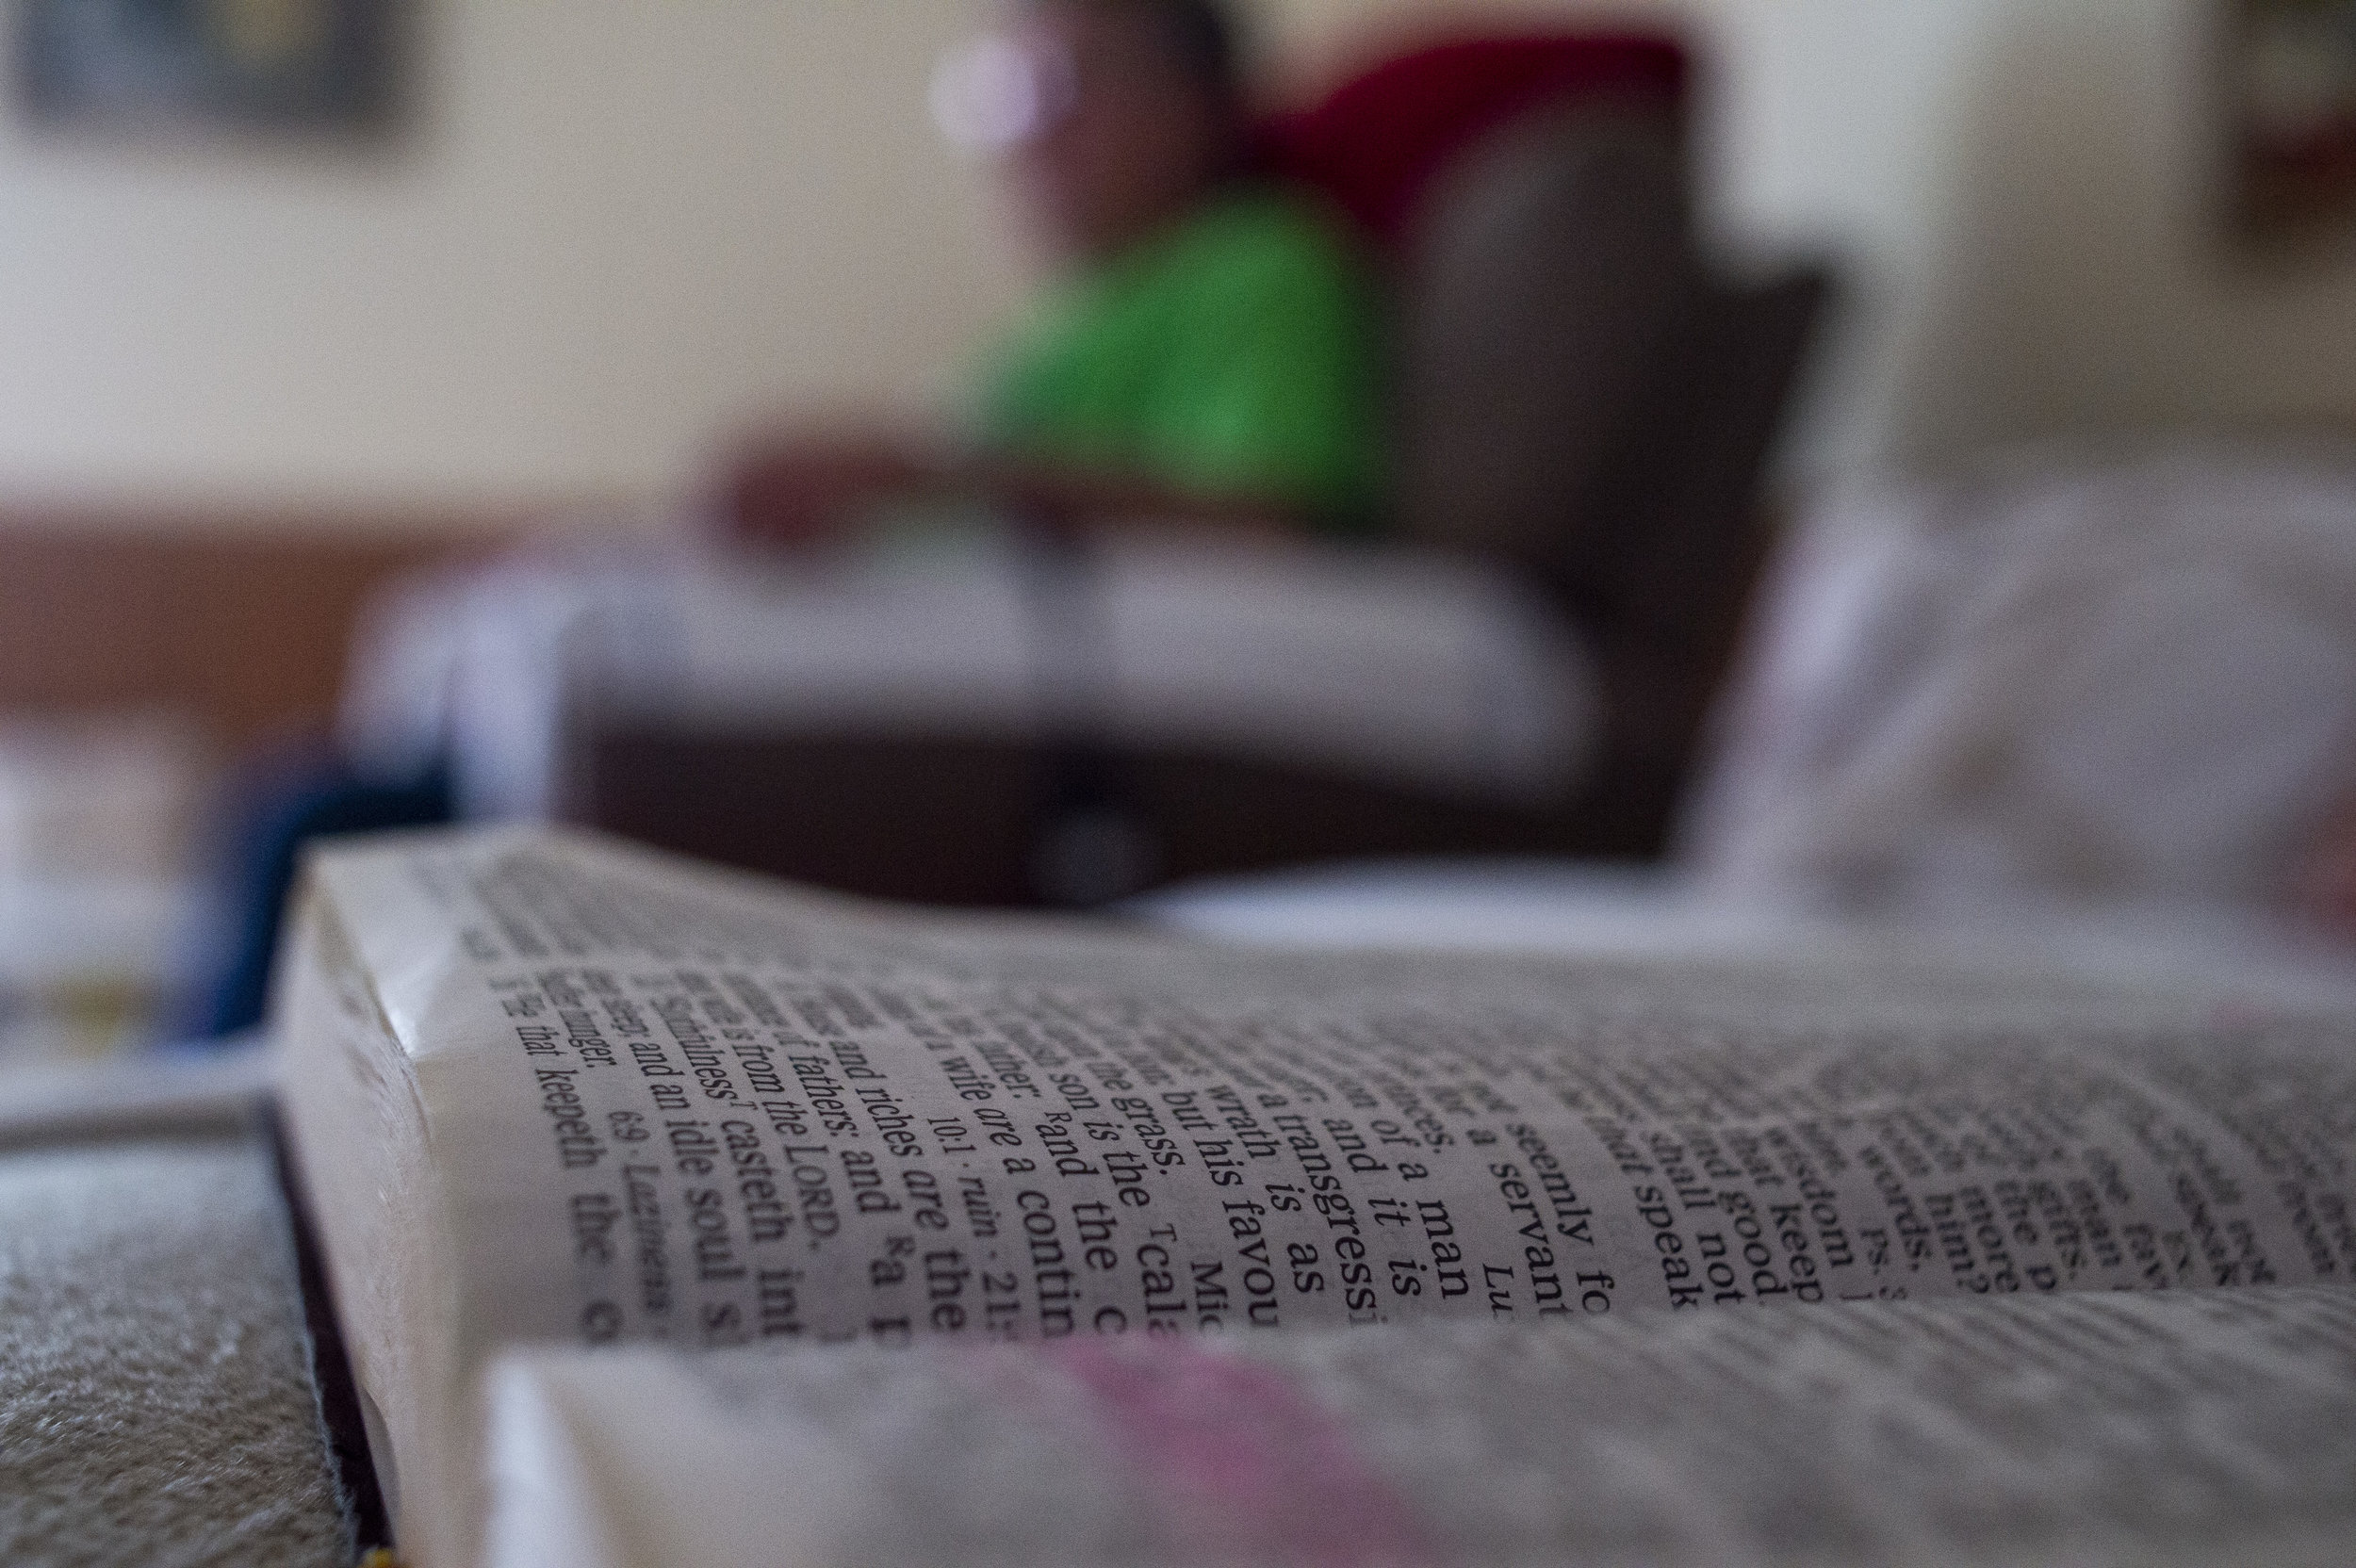  Charles Shortridge sits in his living room in his home near Meadowview, Virginia on Friday, January 18. A bible sits open nearby on the couch, with many ailments affecting his daily life, Charles notes that his faith plays a big role in his attitude